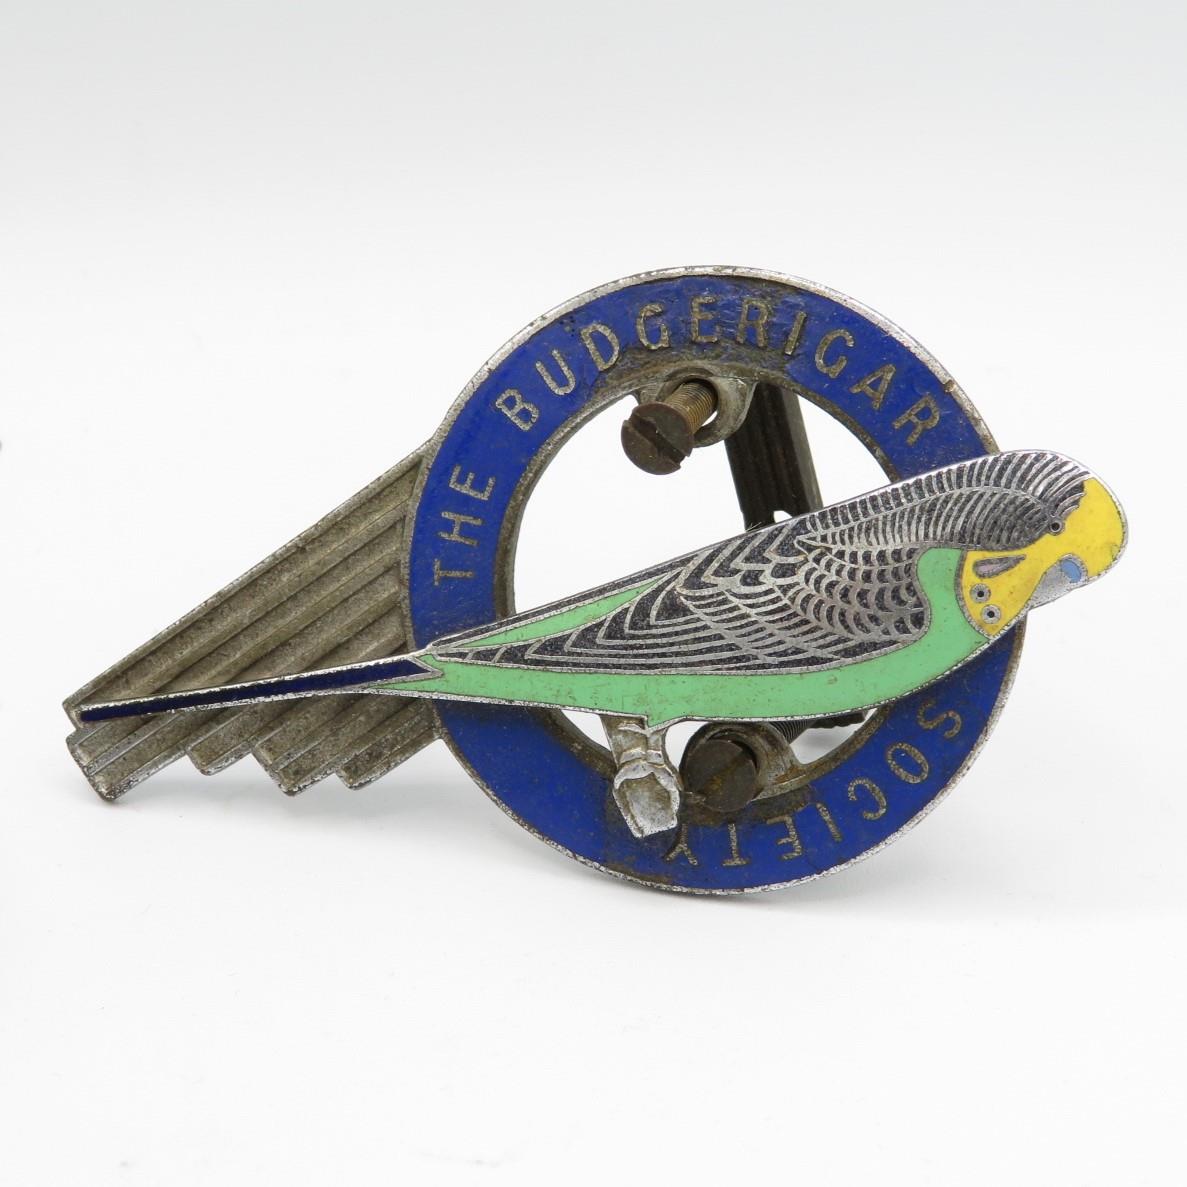 Large Western India AA Bumper Badge and Bumper Badge for Budgerigar Society 80-120 - Image 2 of 3